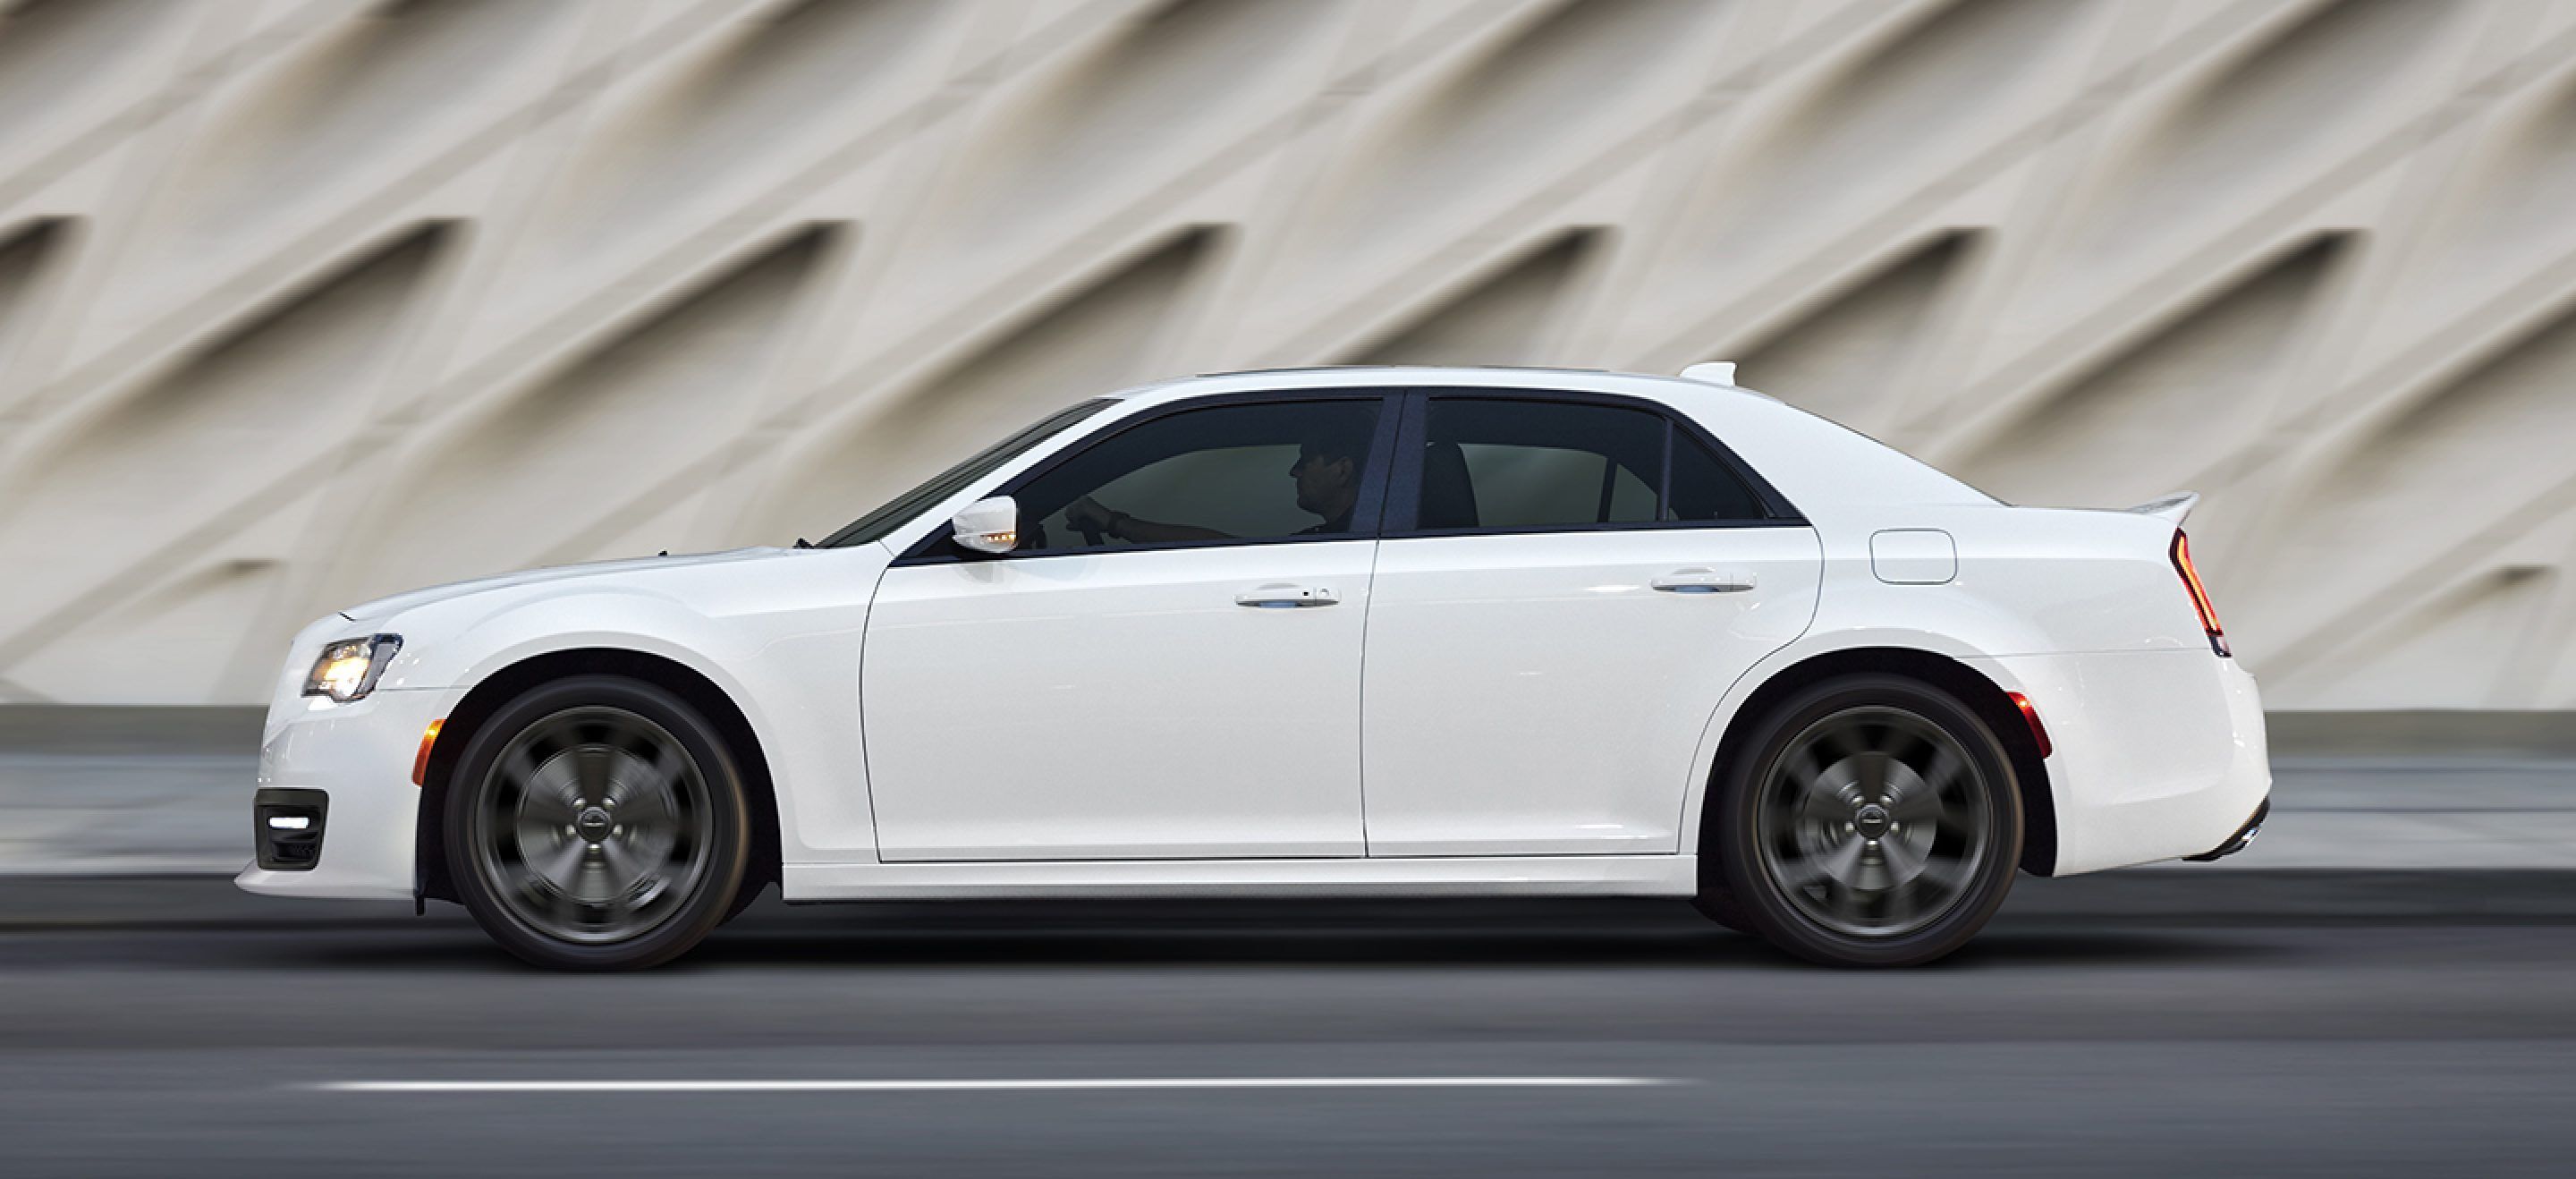 2021 Chrysler 300 Review, Pricing, and Specs